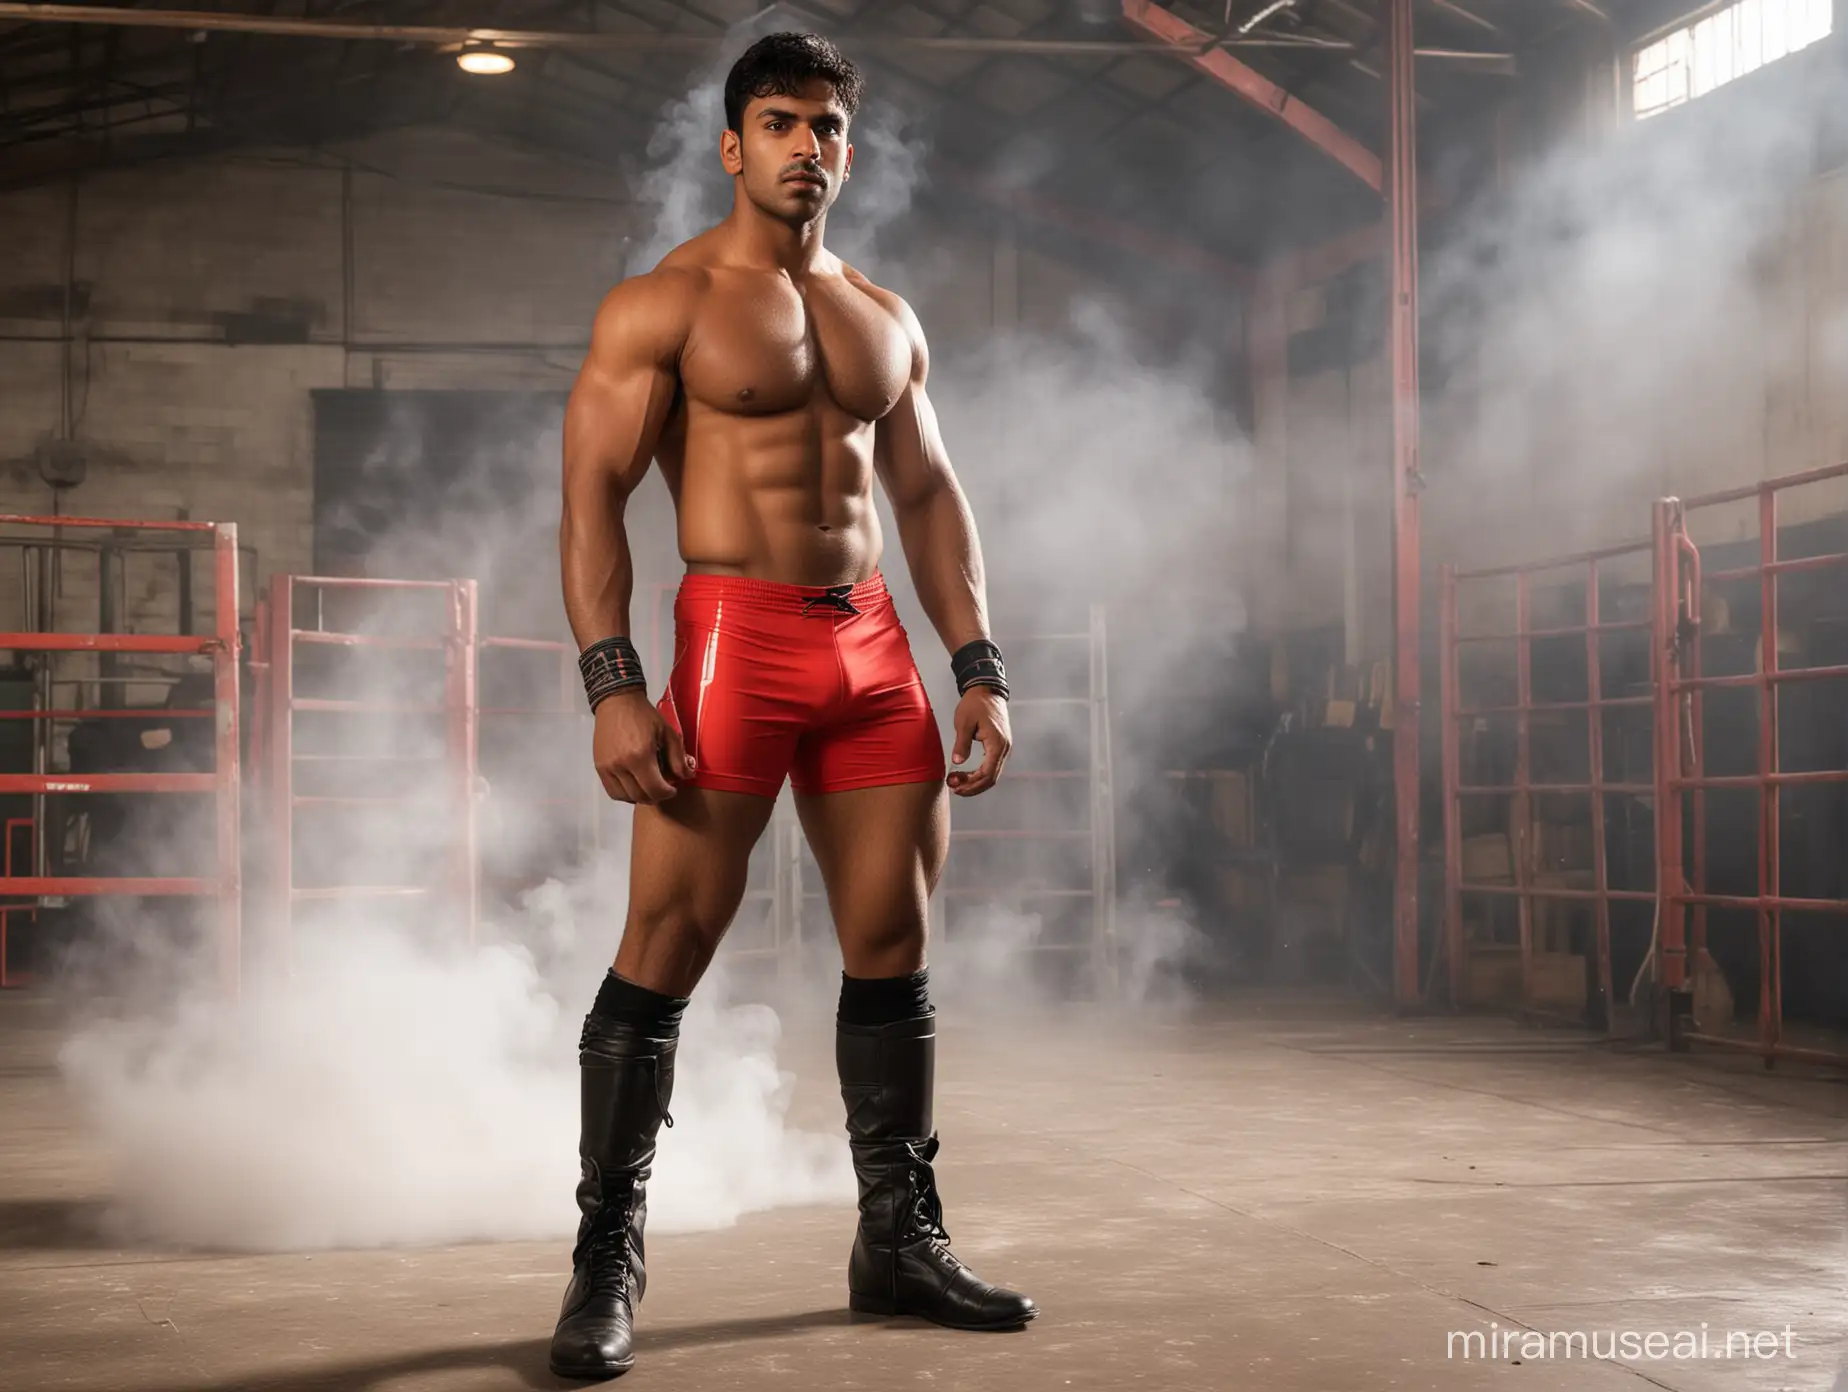 handsome Indian male wrestler with LEAN muscles in his twenties clean shaved. Wearing a tight red wrestling shorts and black boots in a wrestling ring inside a smoke filled warehouse